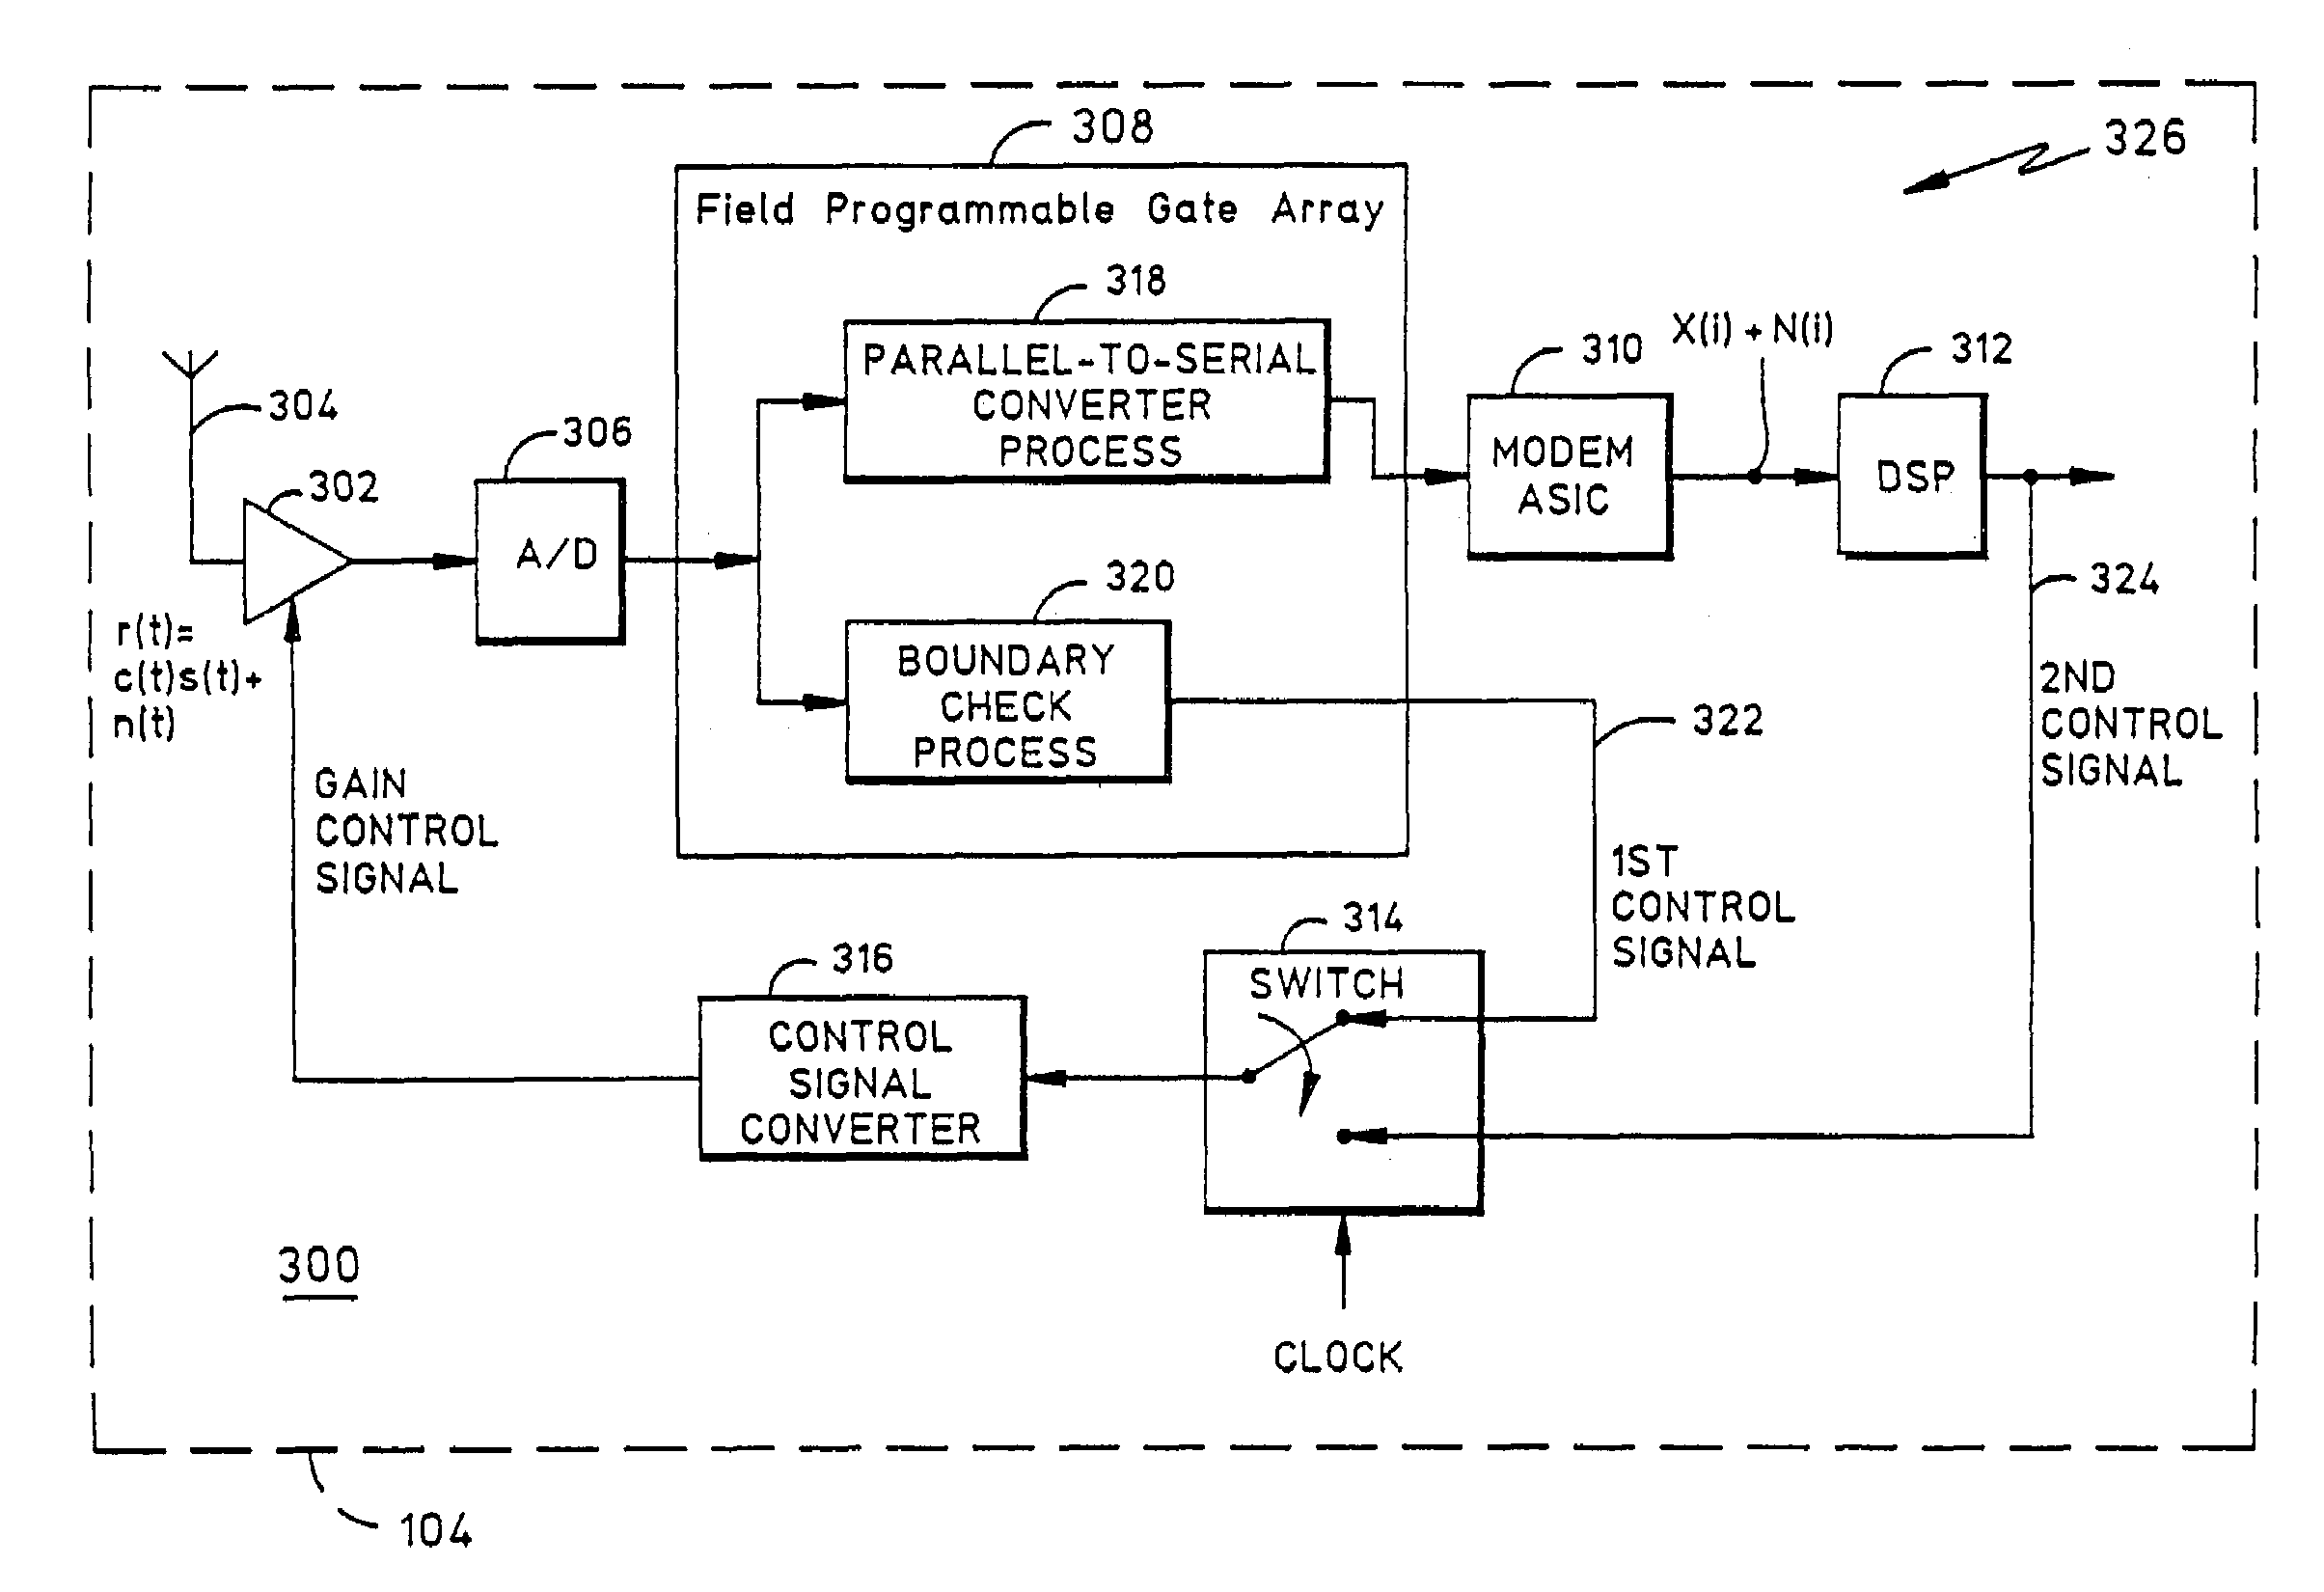 Automatic gain control methods and apparatus suitable for use in OFDM receivers